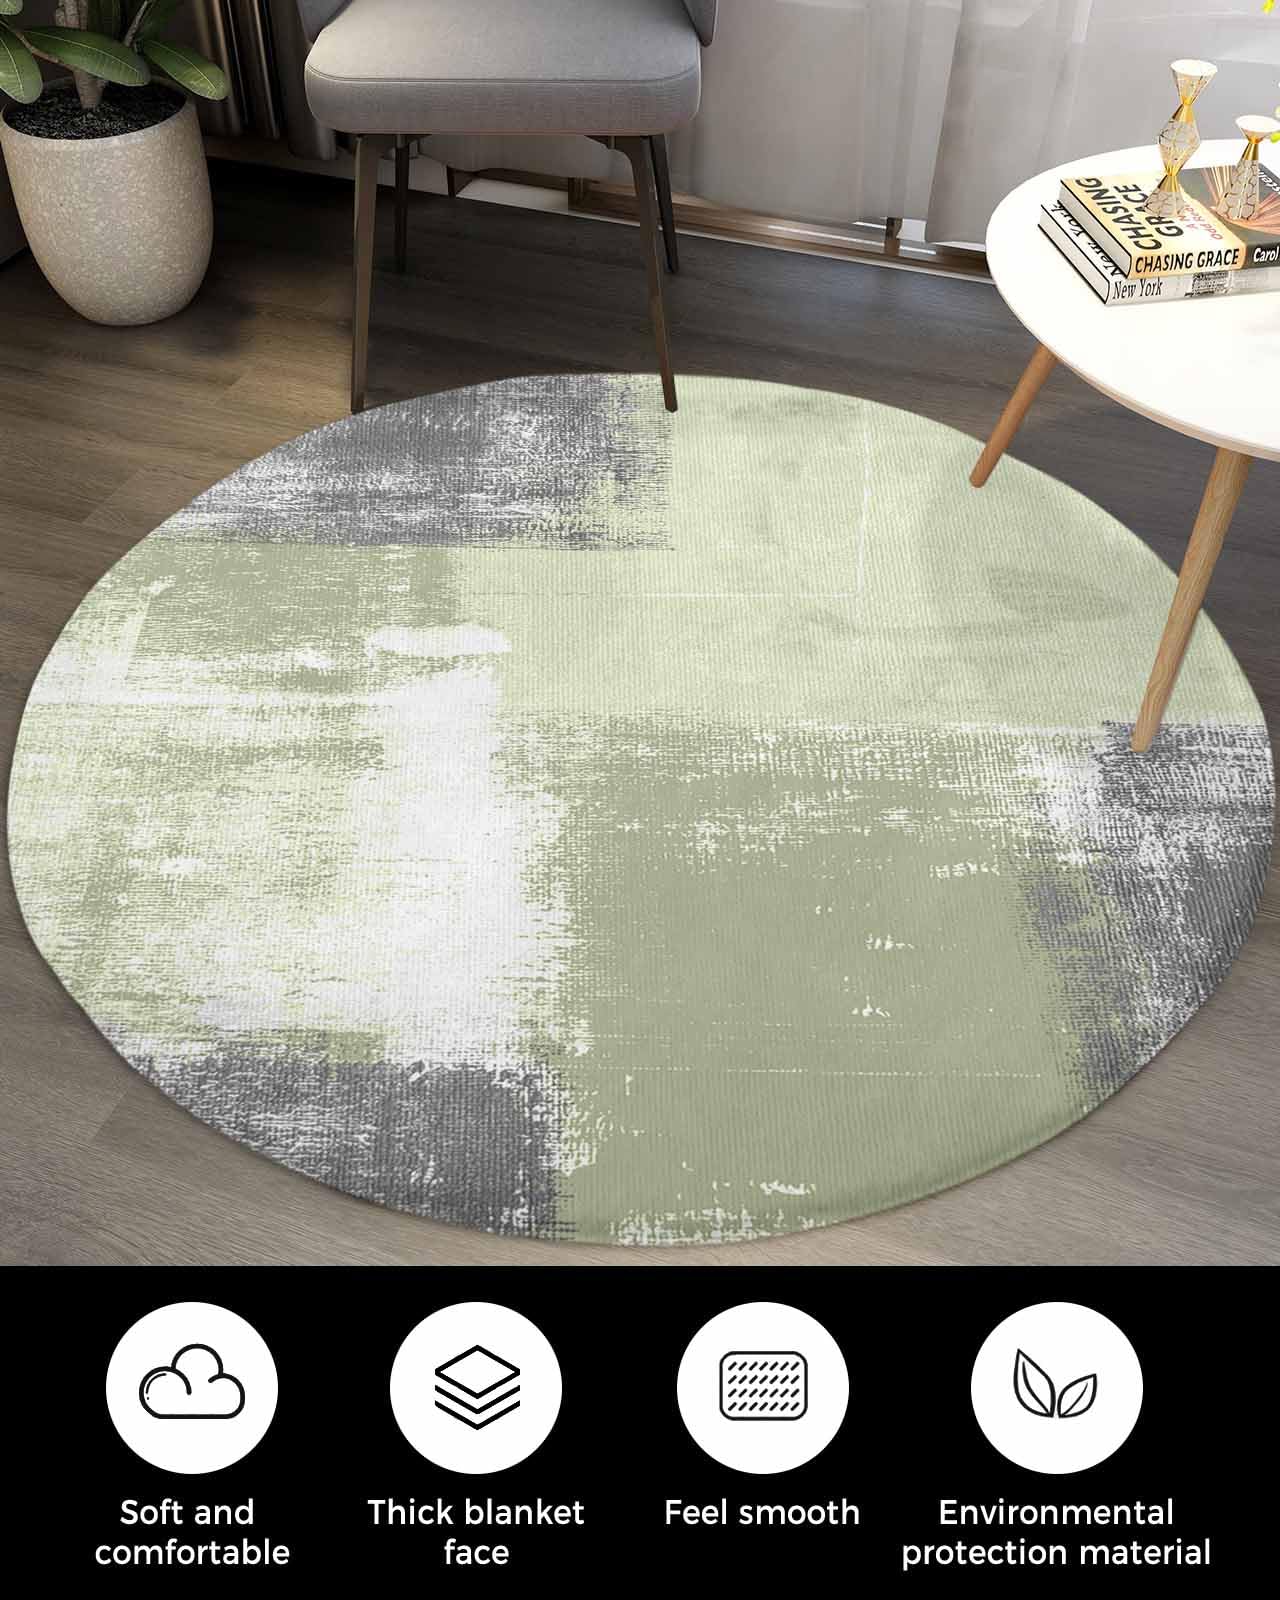 Modern Sage Green Fluffy Round Area Rug Carpets 5ft, Plush Shaggy Carpet Soft Circular Rugs, Non-Slip Fuzzy Accent Floor Mat for Living Room Bedroom Nursery Home Decor Abstract Grey White Painted Art